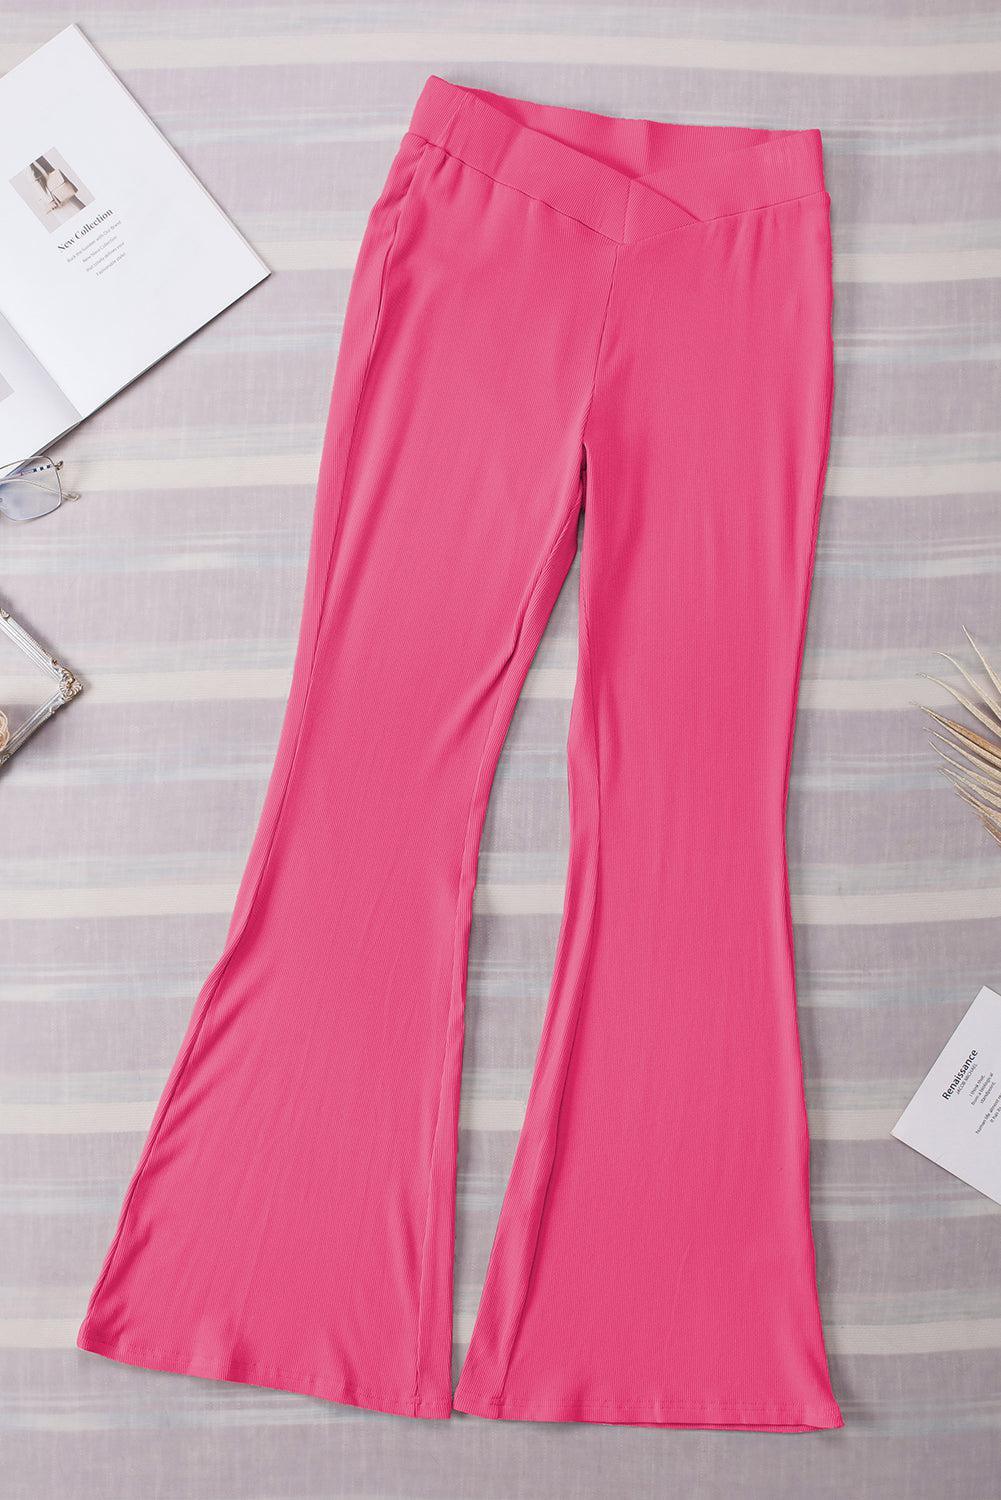 a pair of pink pants sitting on top of a table